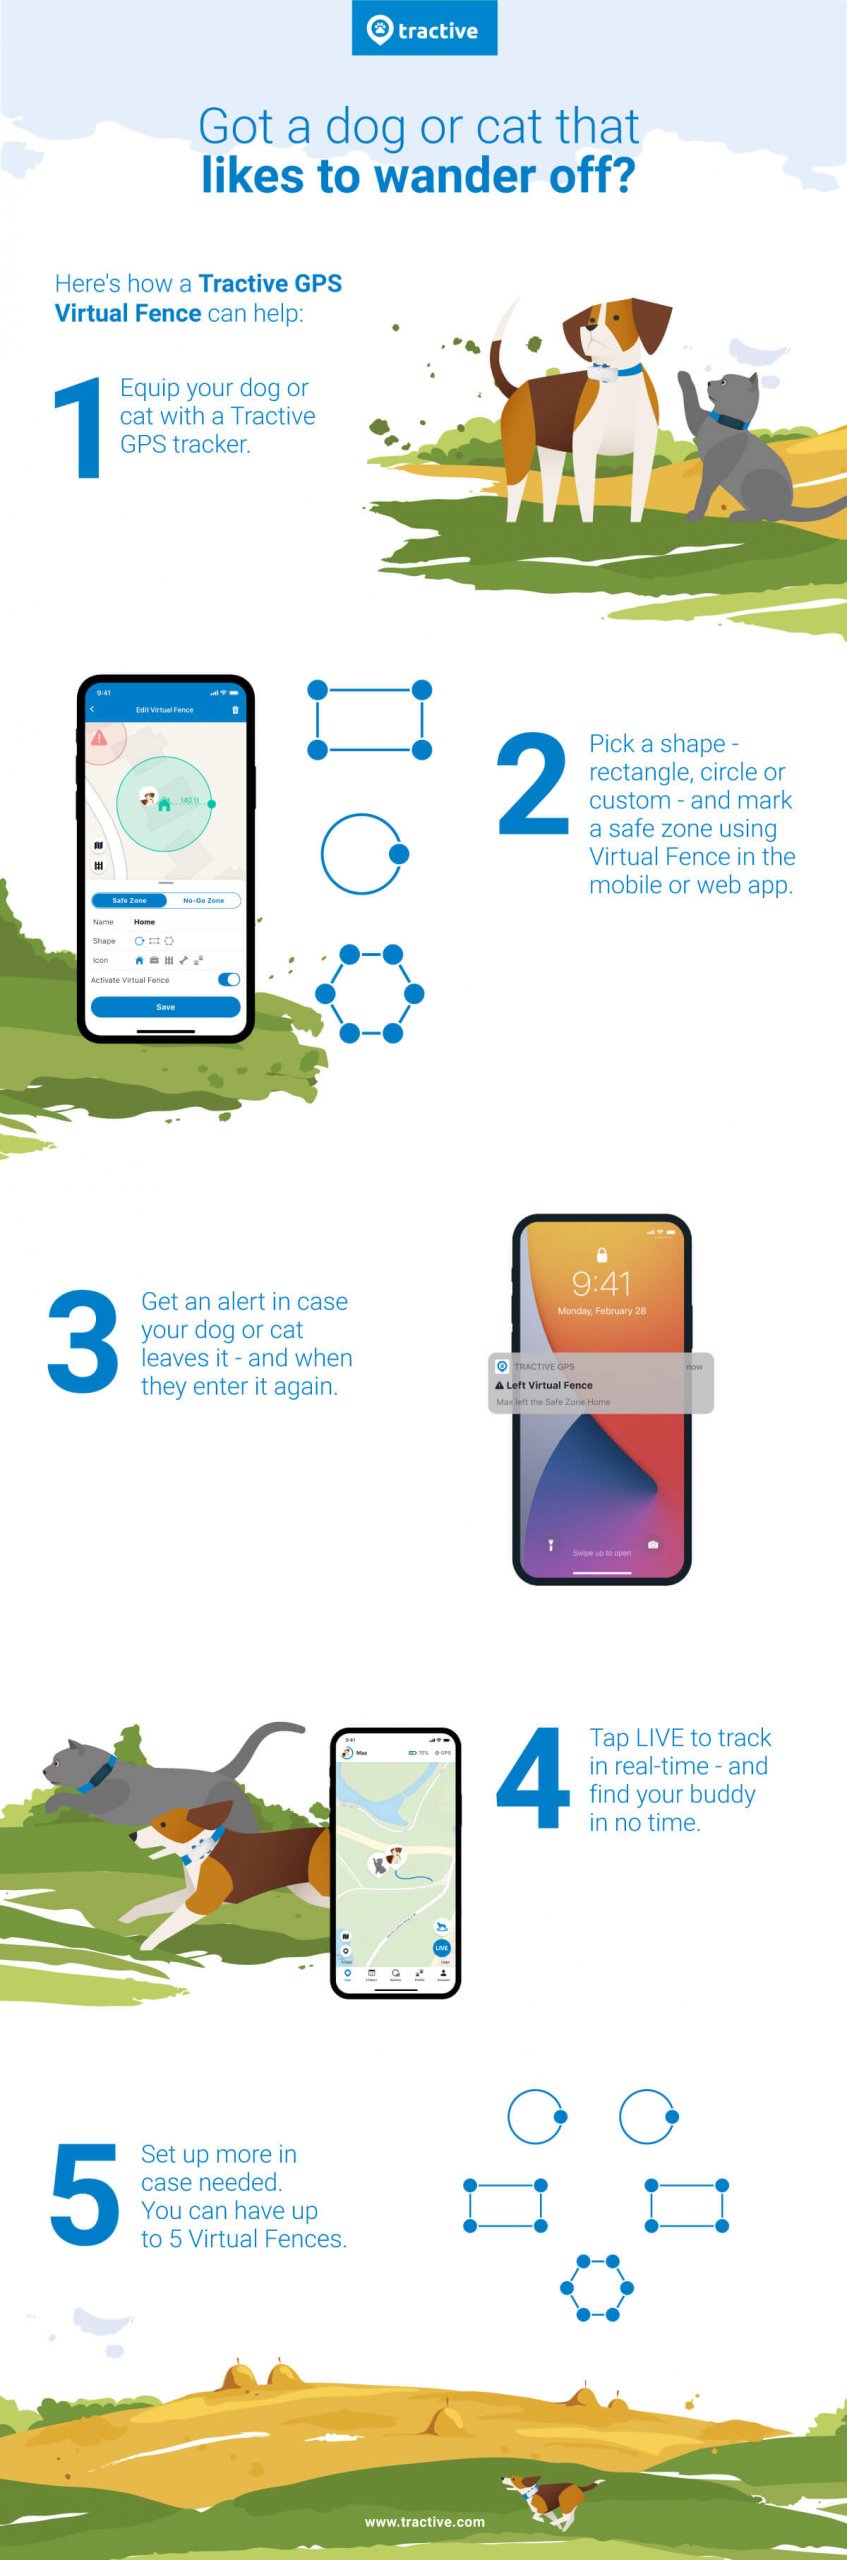 Tractive GPS Virtual Fence tutorial infographic